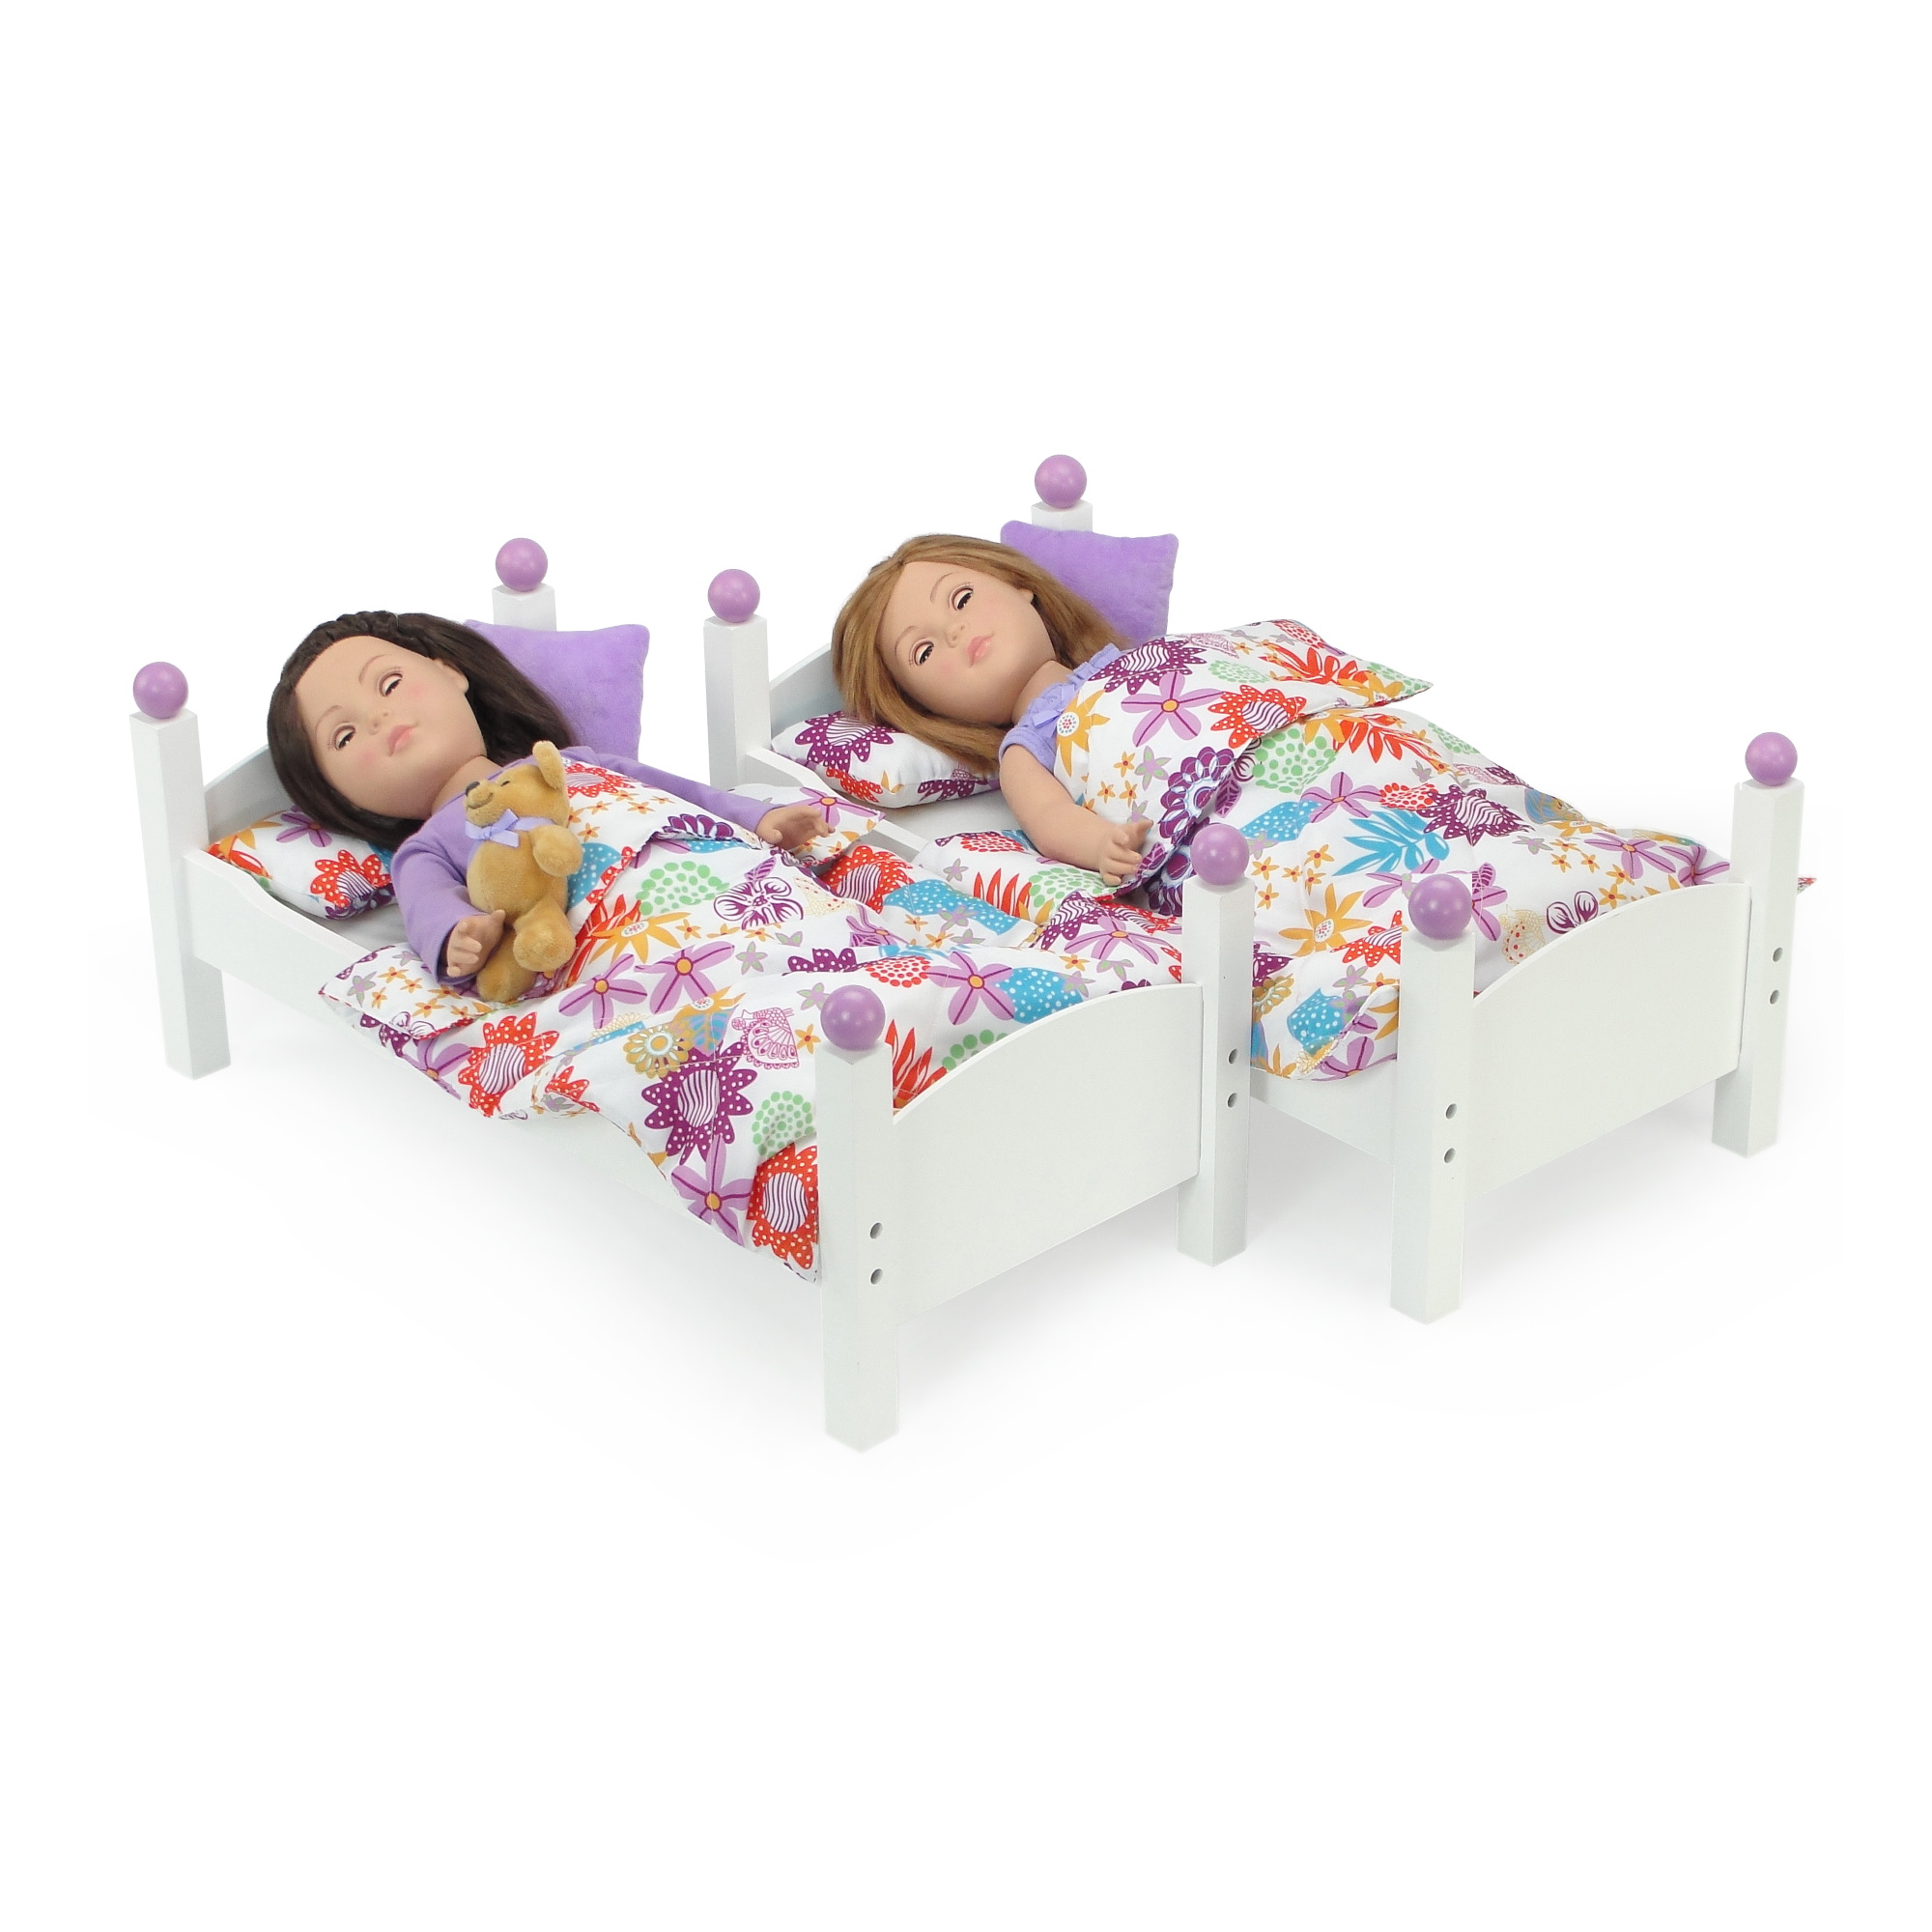 Emily Rose 18 Inch Doll Furniture | 18" Doll Bunk Bed - 2 Single Stackable Doll Beds | Doll Bunkbed Includes 2 Sets of Colorful Bedding & Ladder | Fits 18" American Girl Dolls - image 3 of 8